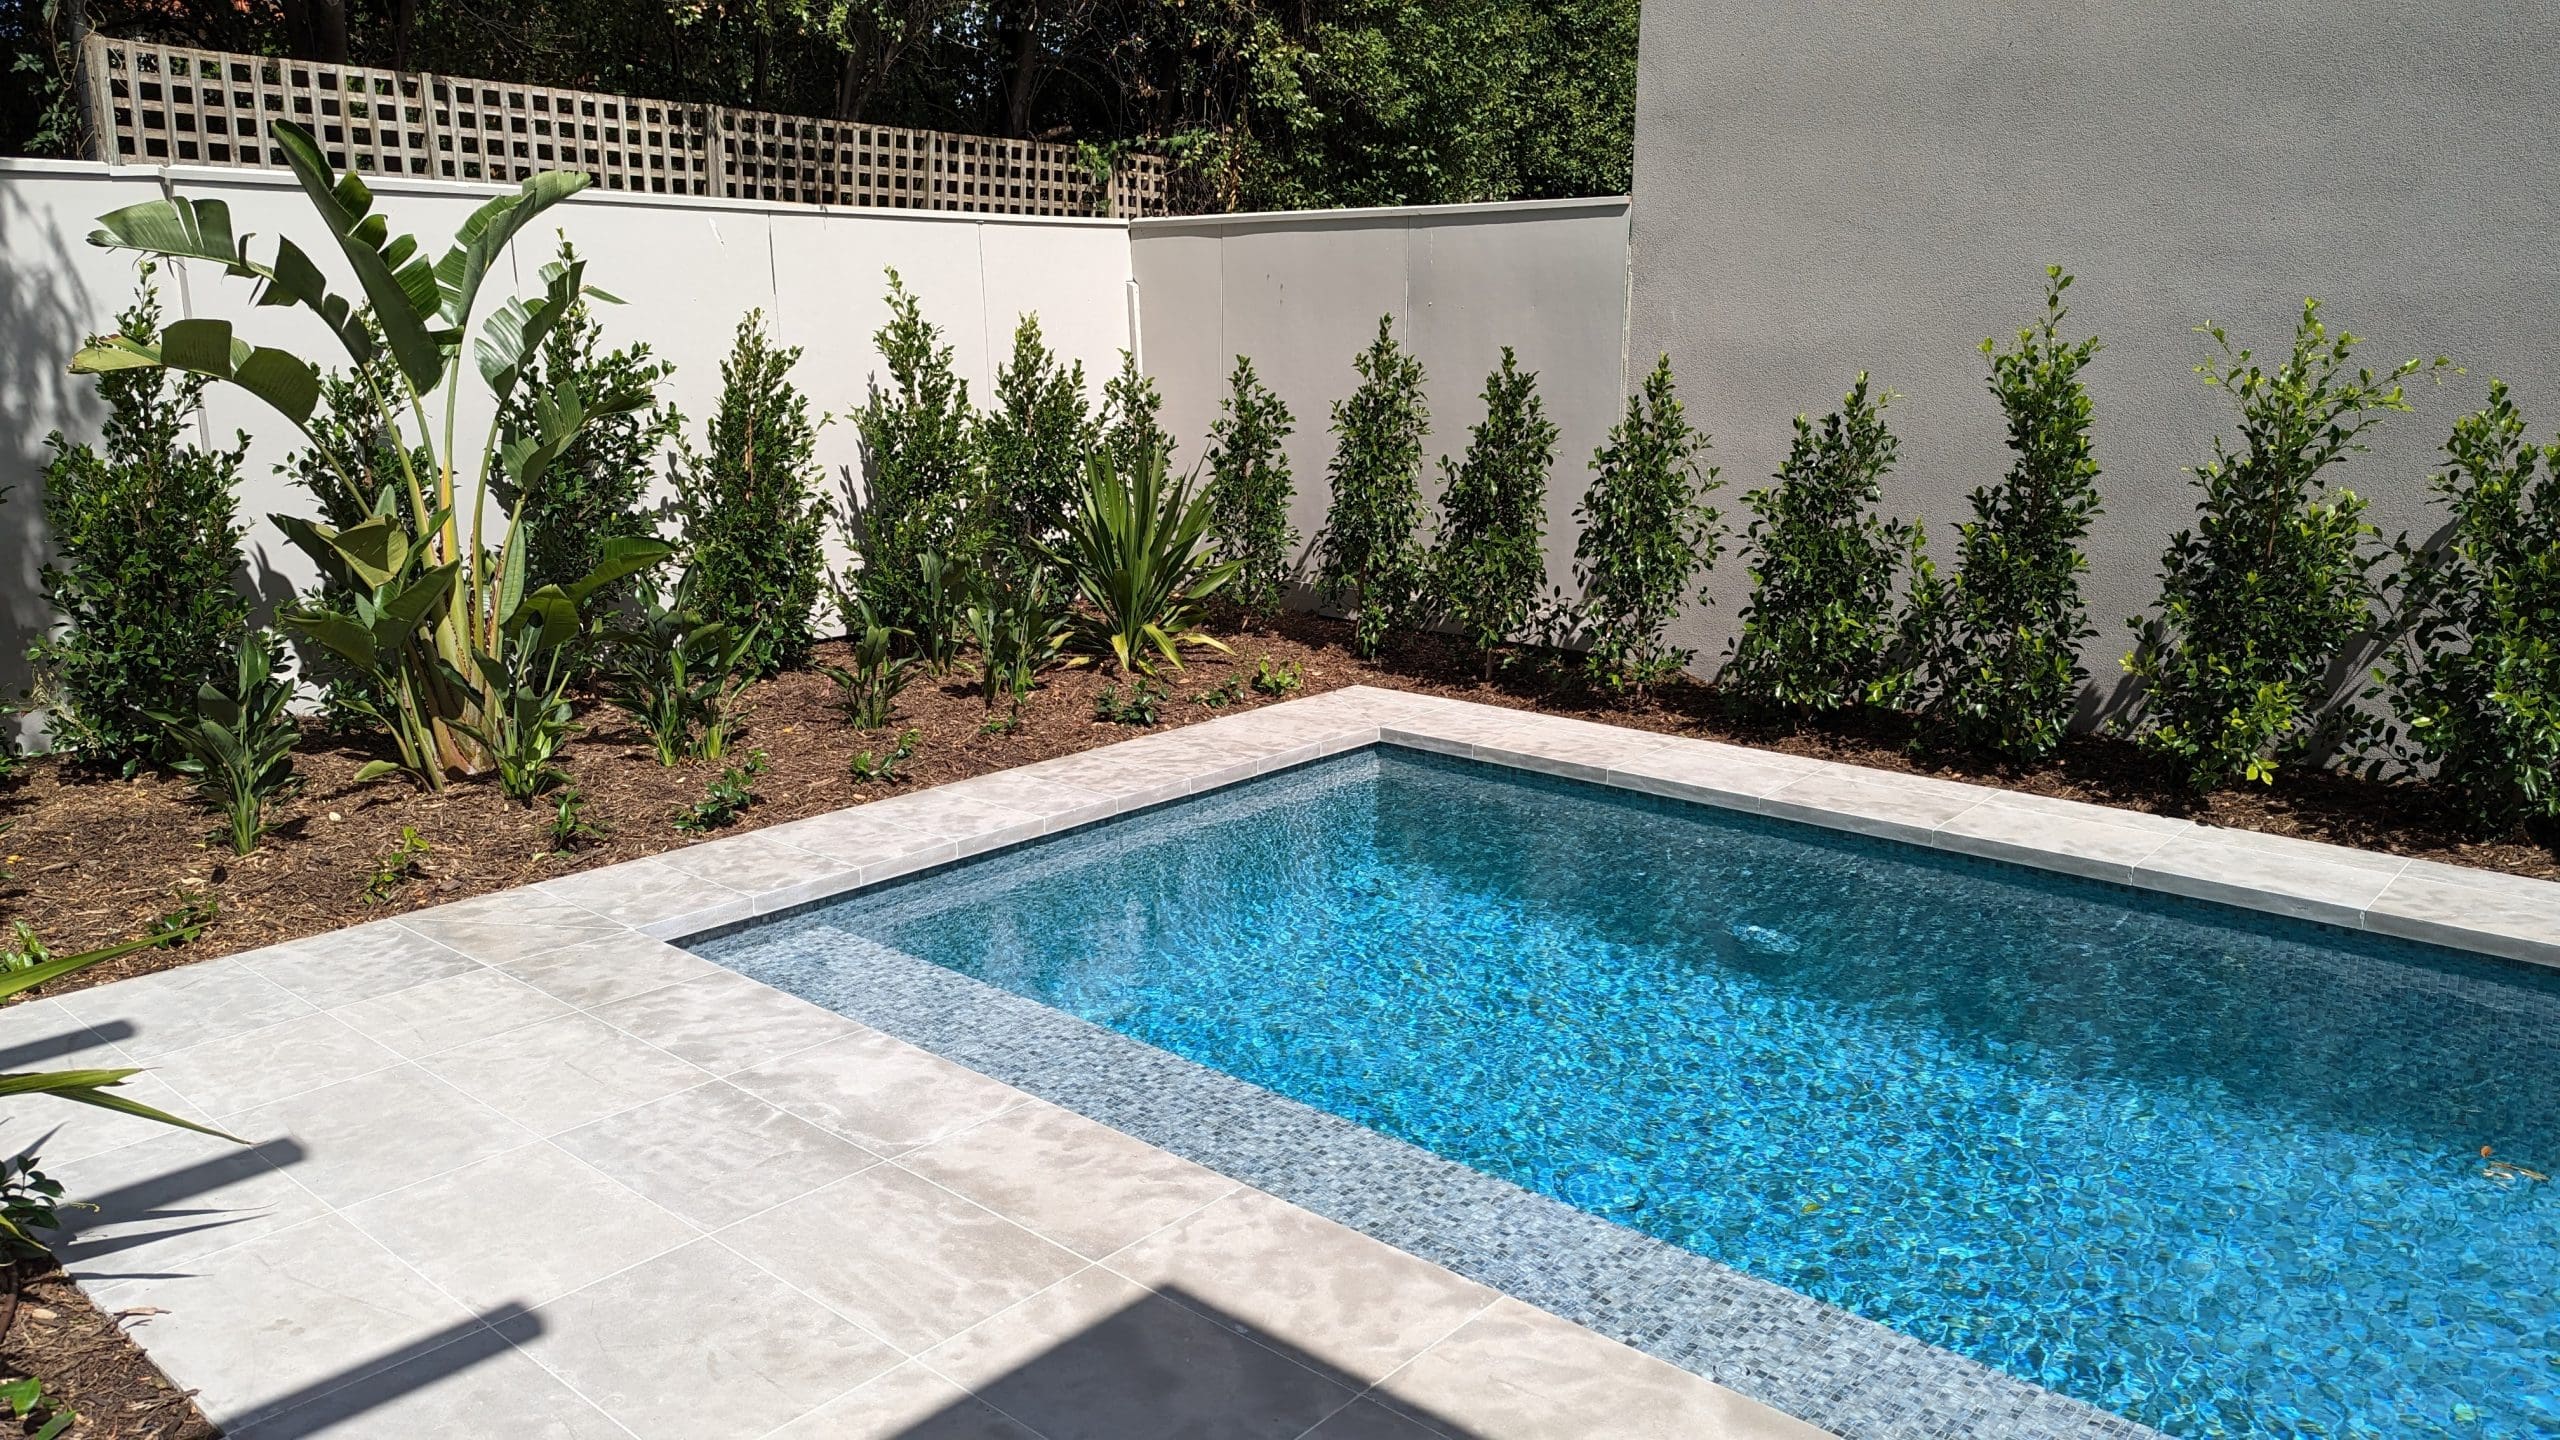 MADDISON BRUSHED & TUMBLED LIMESTONE_RMS TRADERS_NATURAL STONE GREY PAVERS POOL COPING TILES SUPPLIER MELBOURNE (32)